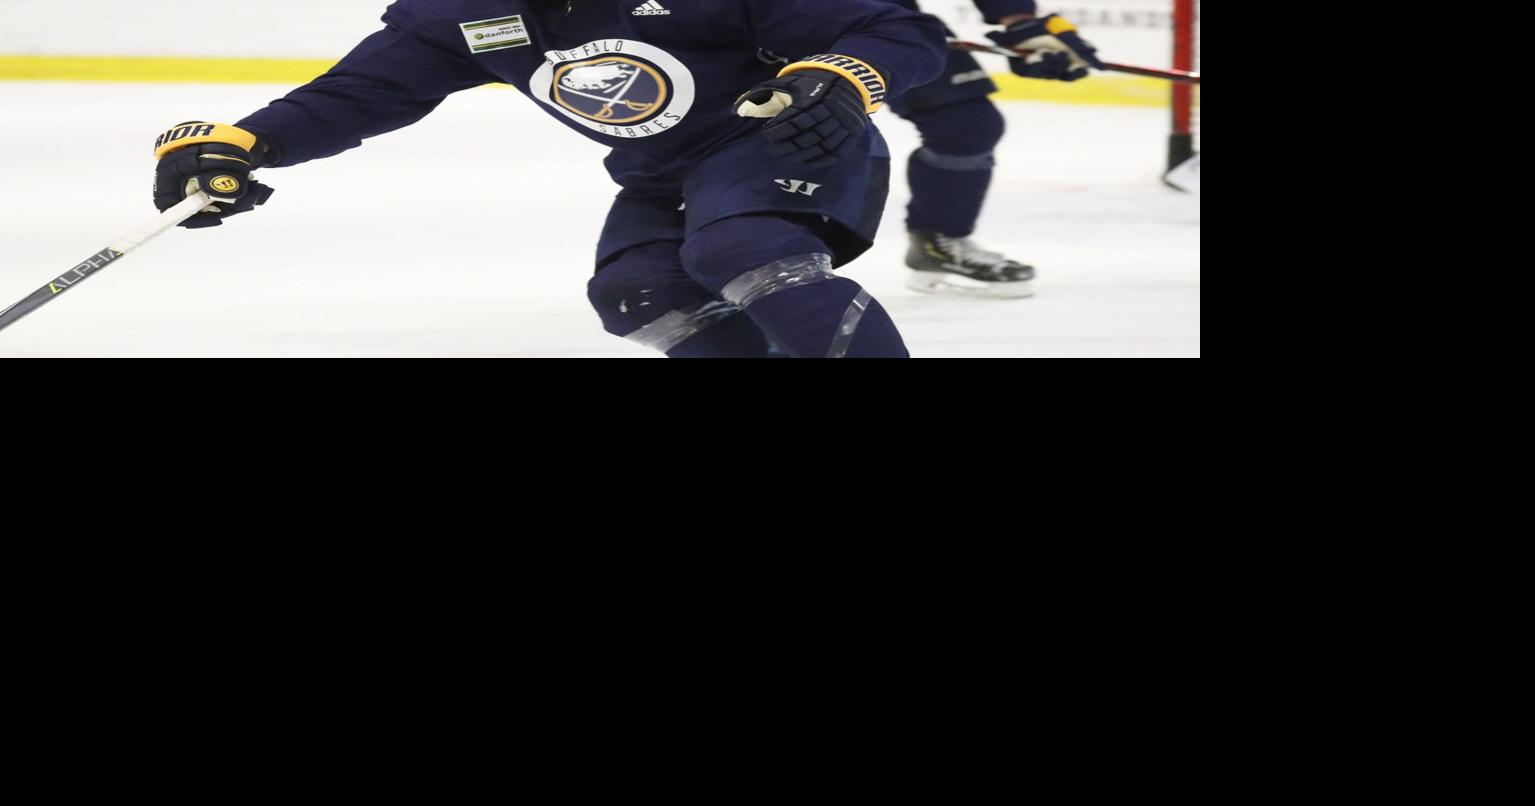 McCabe springs into action for Sabres